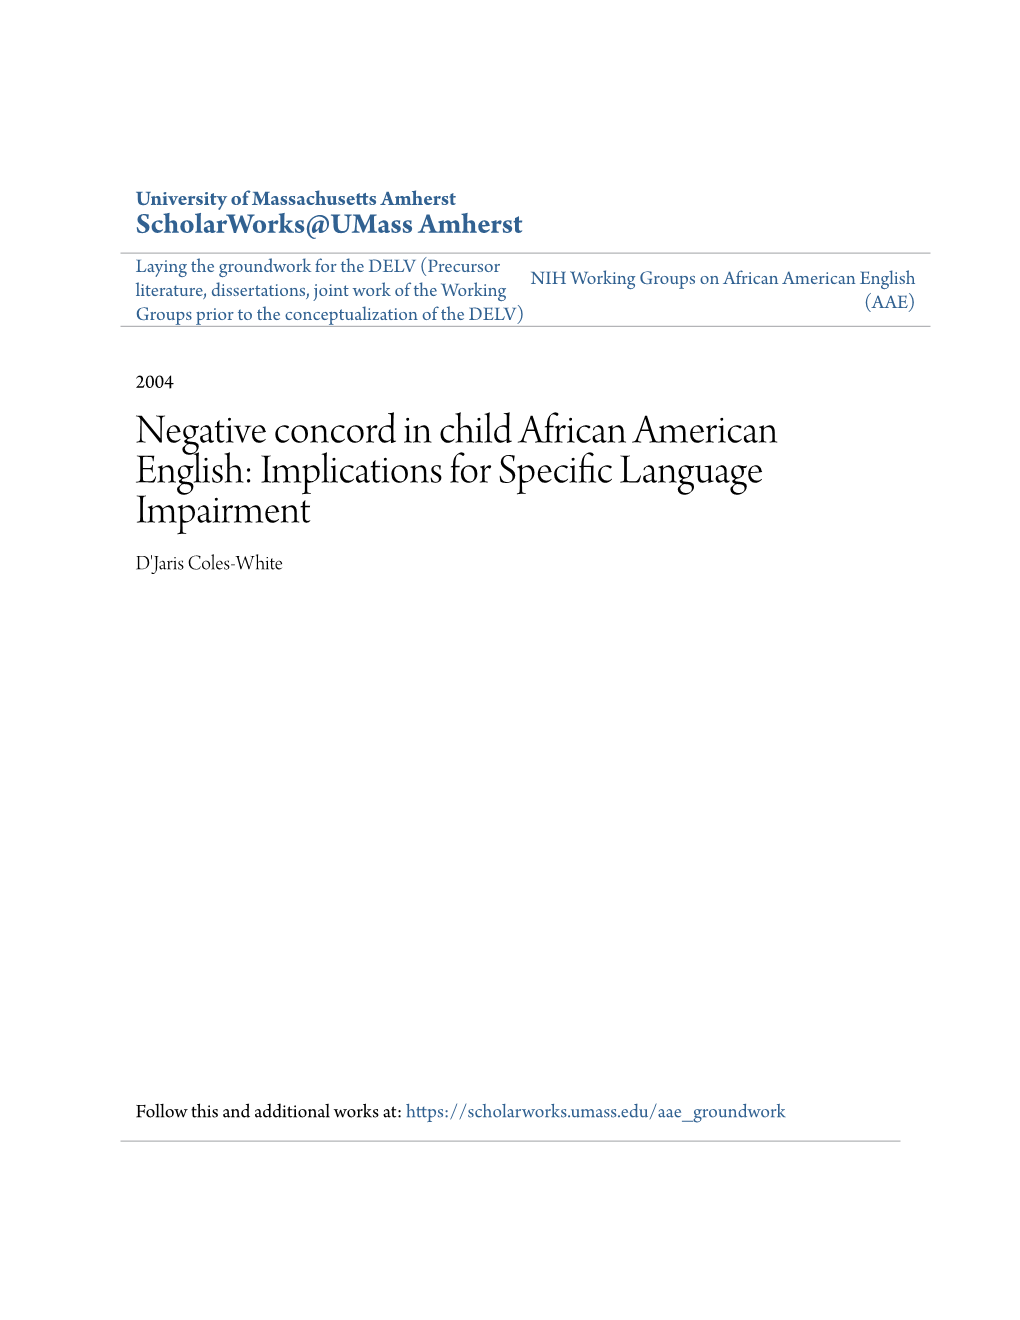 Negative Concord in Child African American English: Implications for Specific Language Impairment D'jaris Coles-White